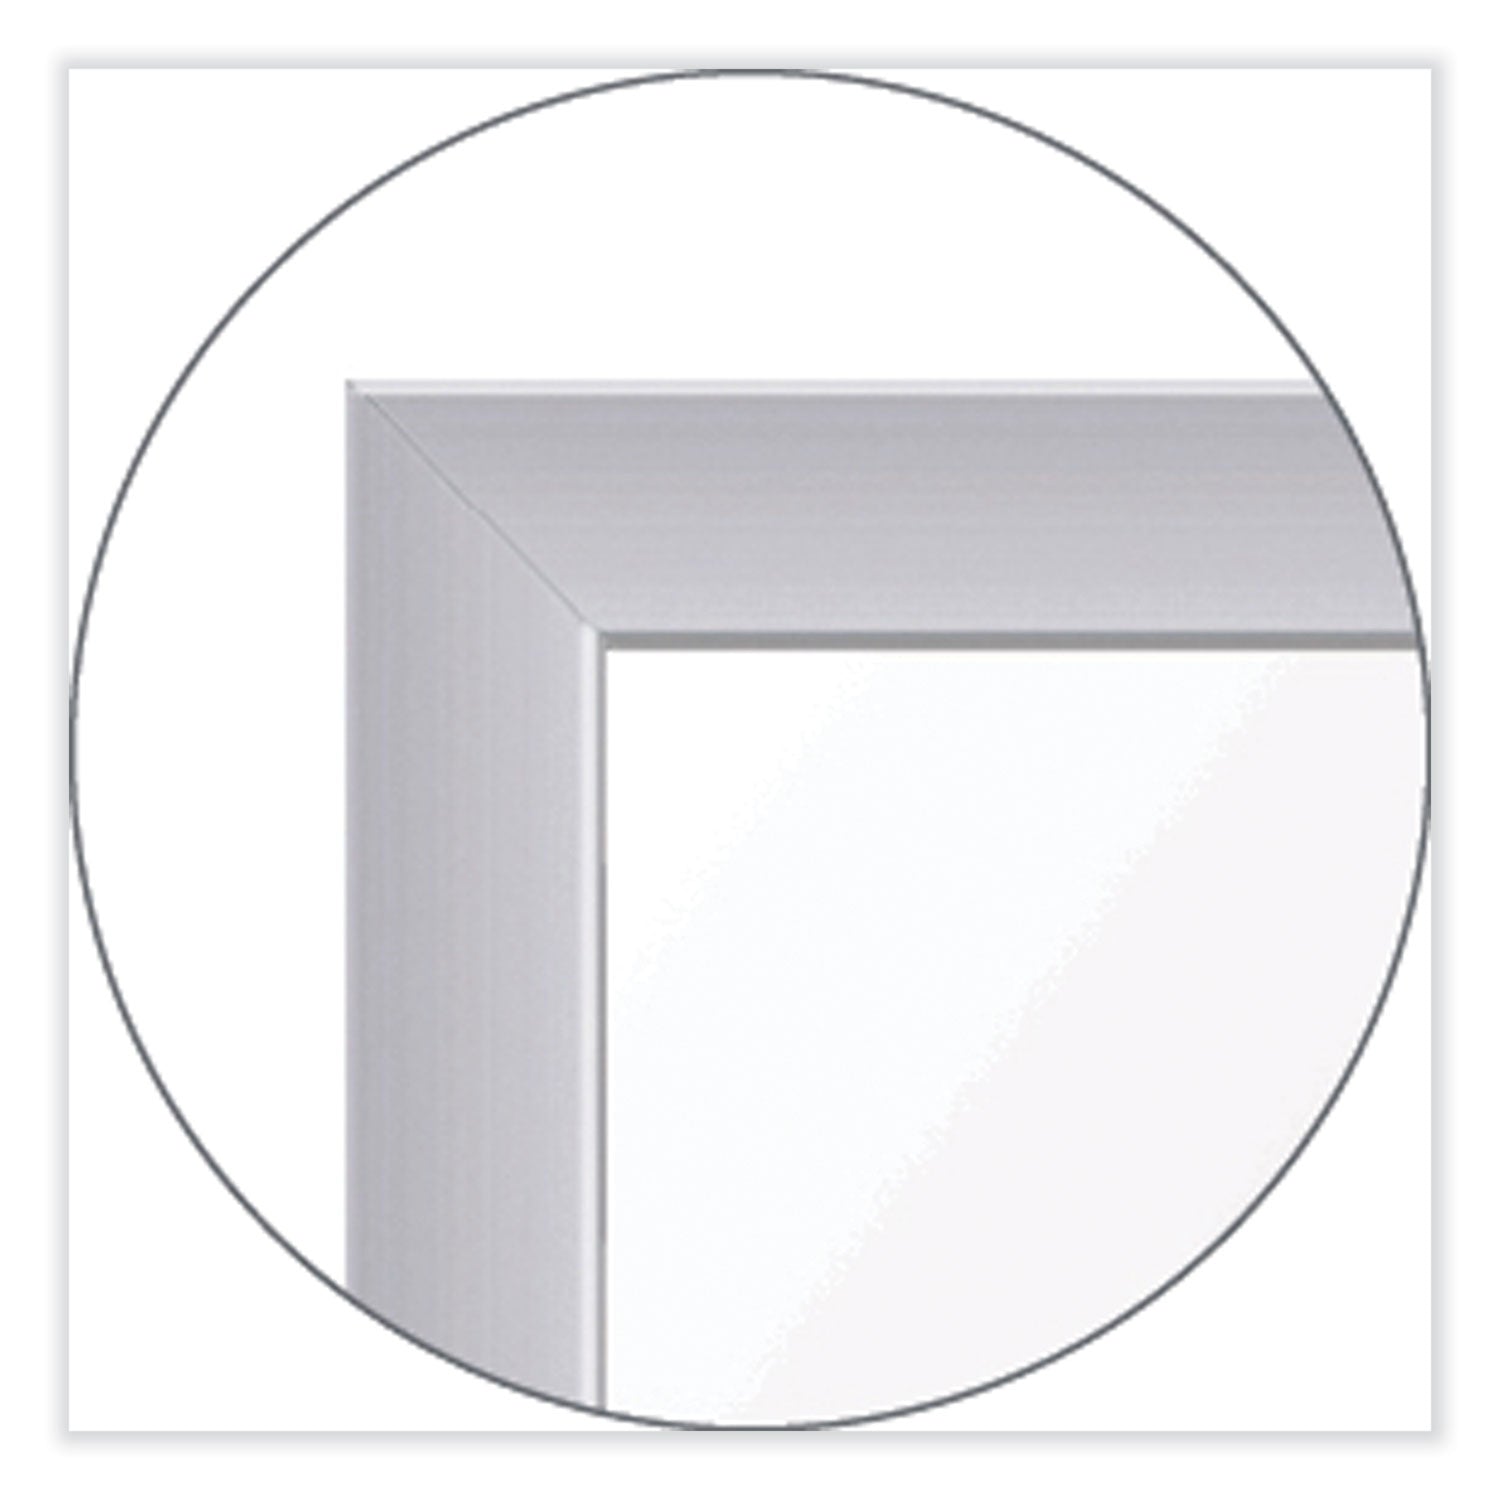 floor-partition-with-aluminum-frame-4806-x-204-x-7186-white-ships-in-7-10-business-days_ghemp724820 - 3